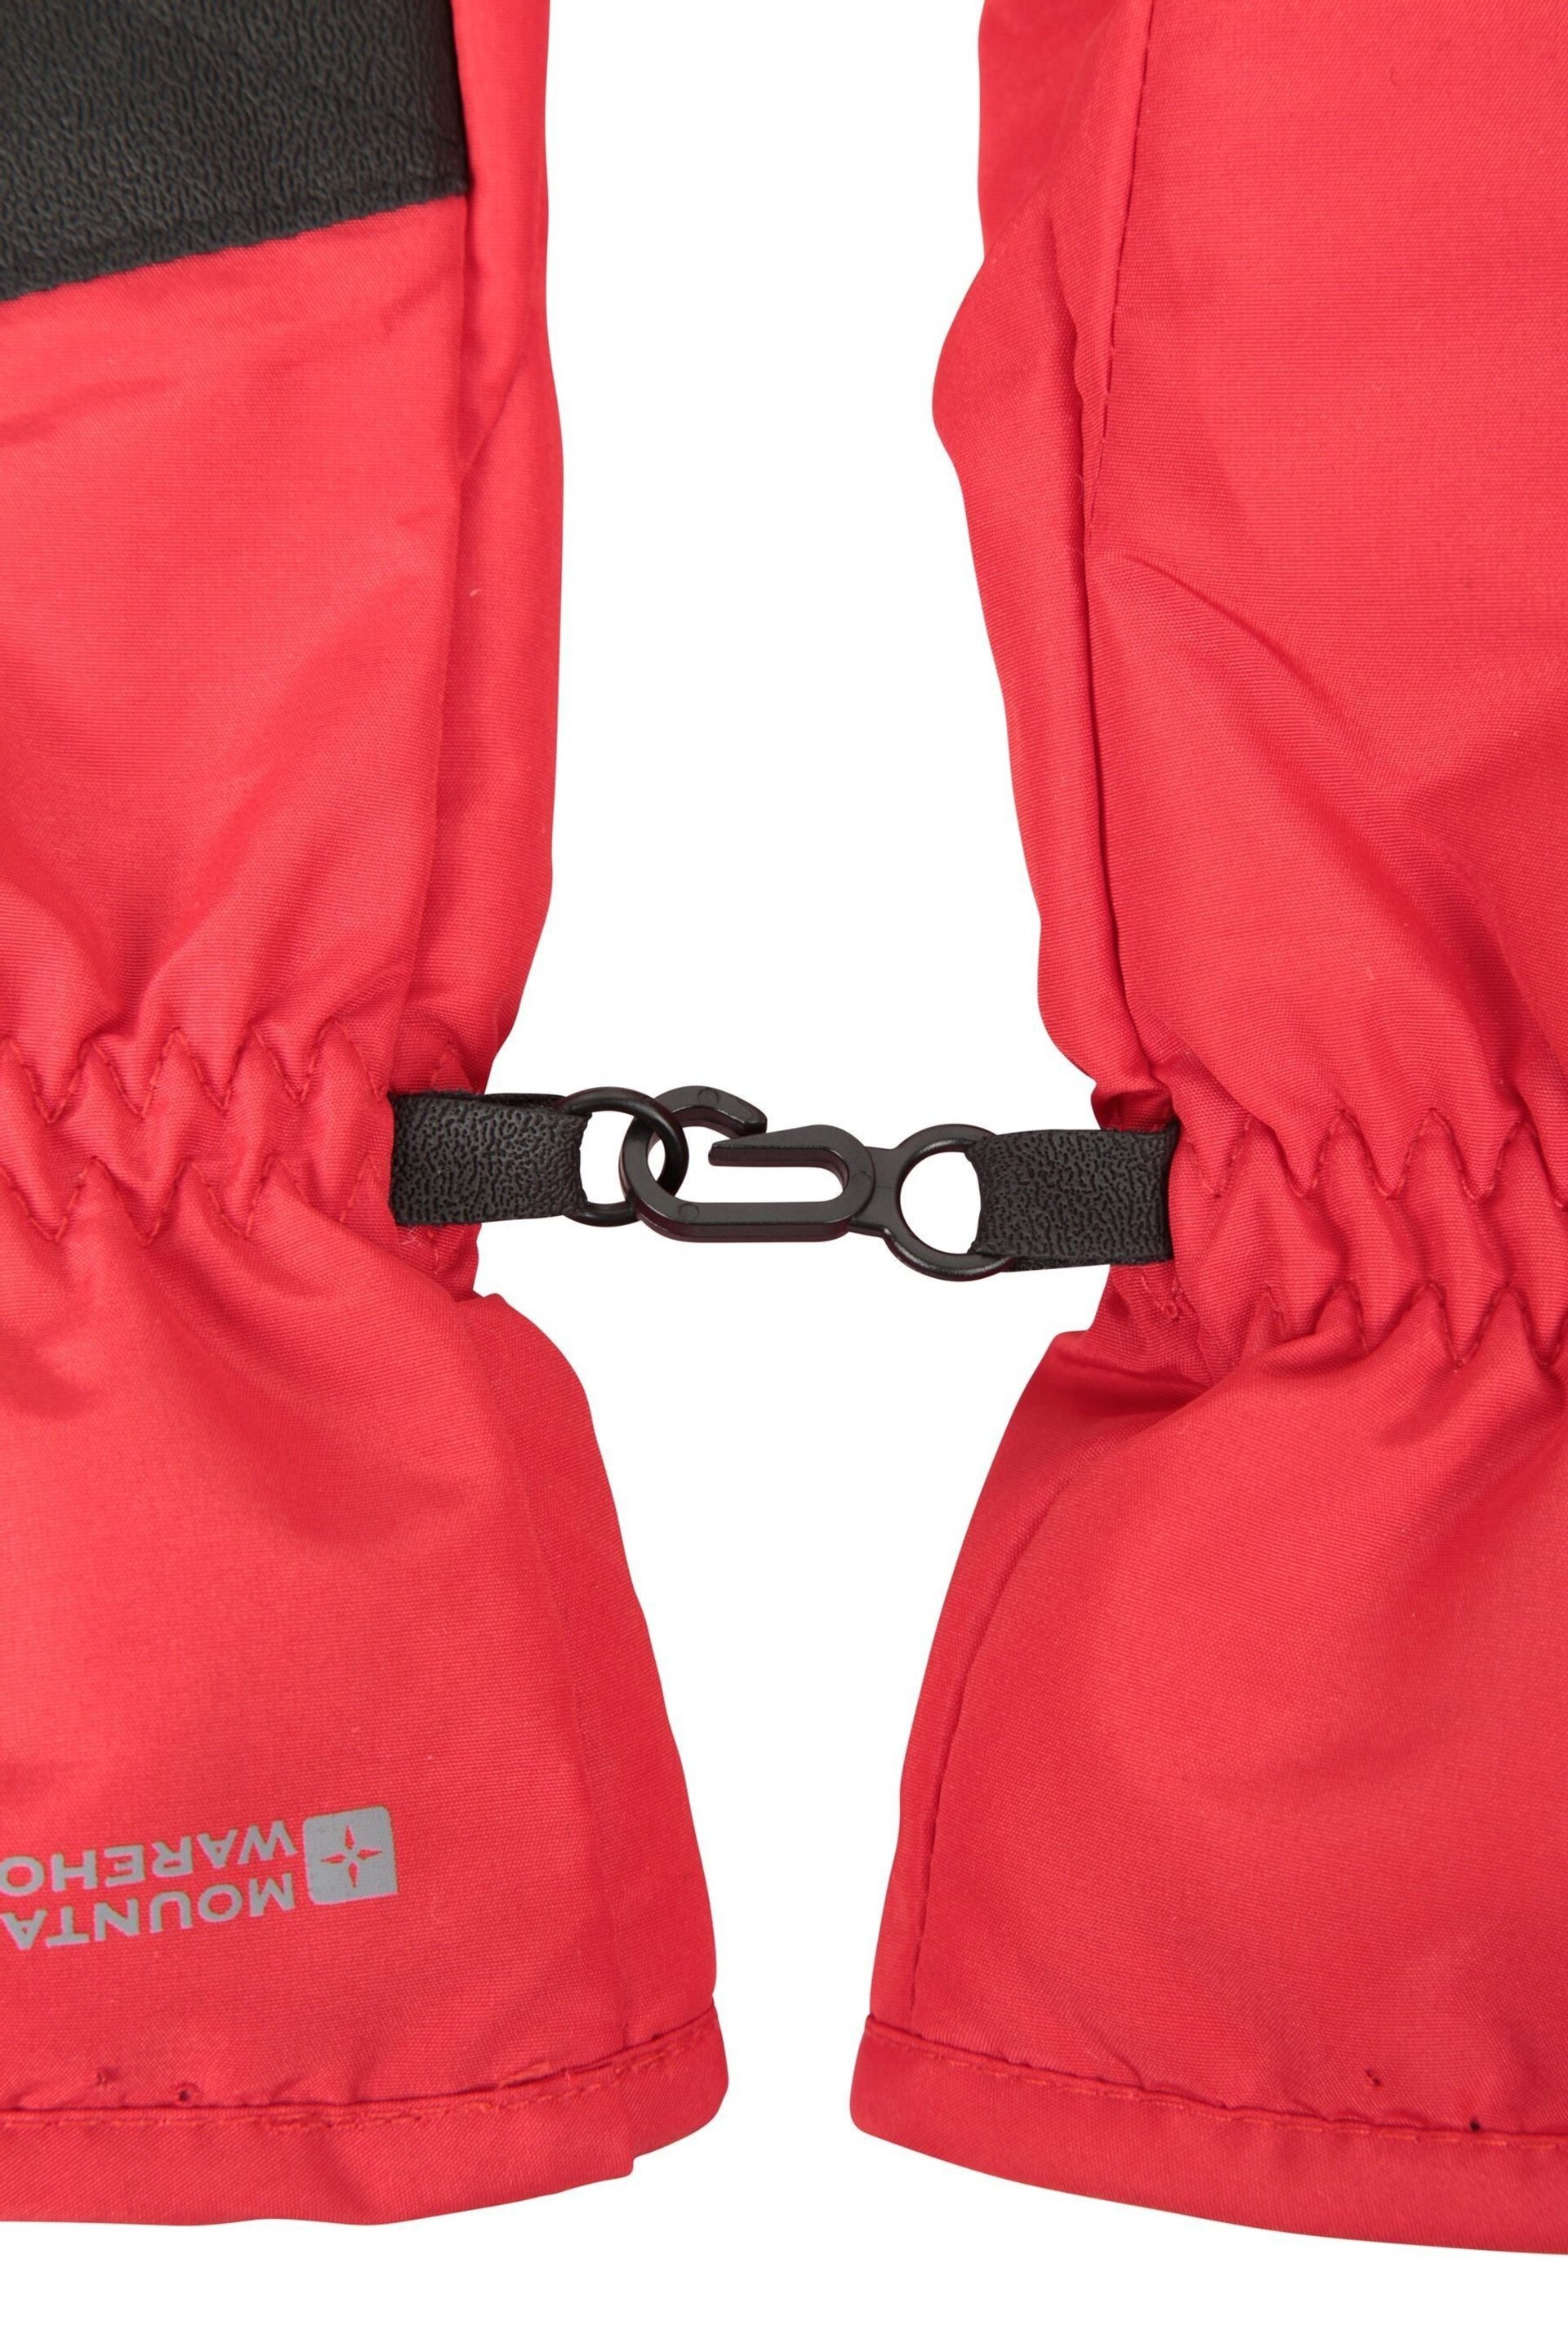 Mountain Warehouse Red Mens Fleece Lined Ski Gloves - Image 6 of 7